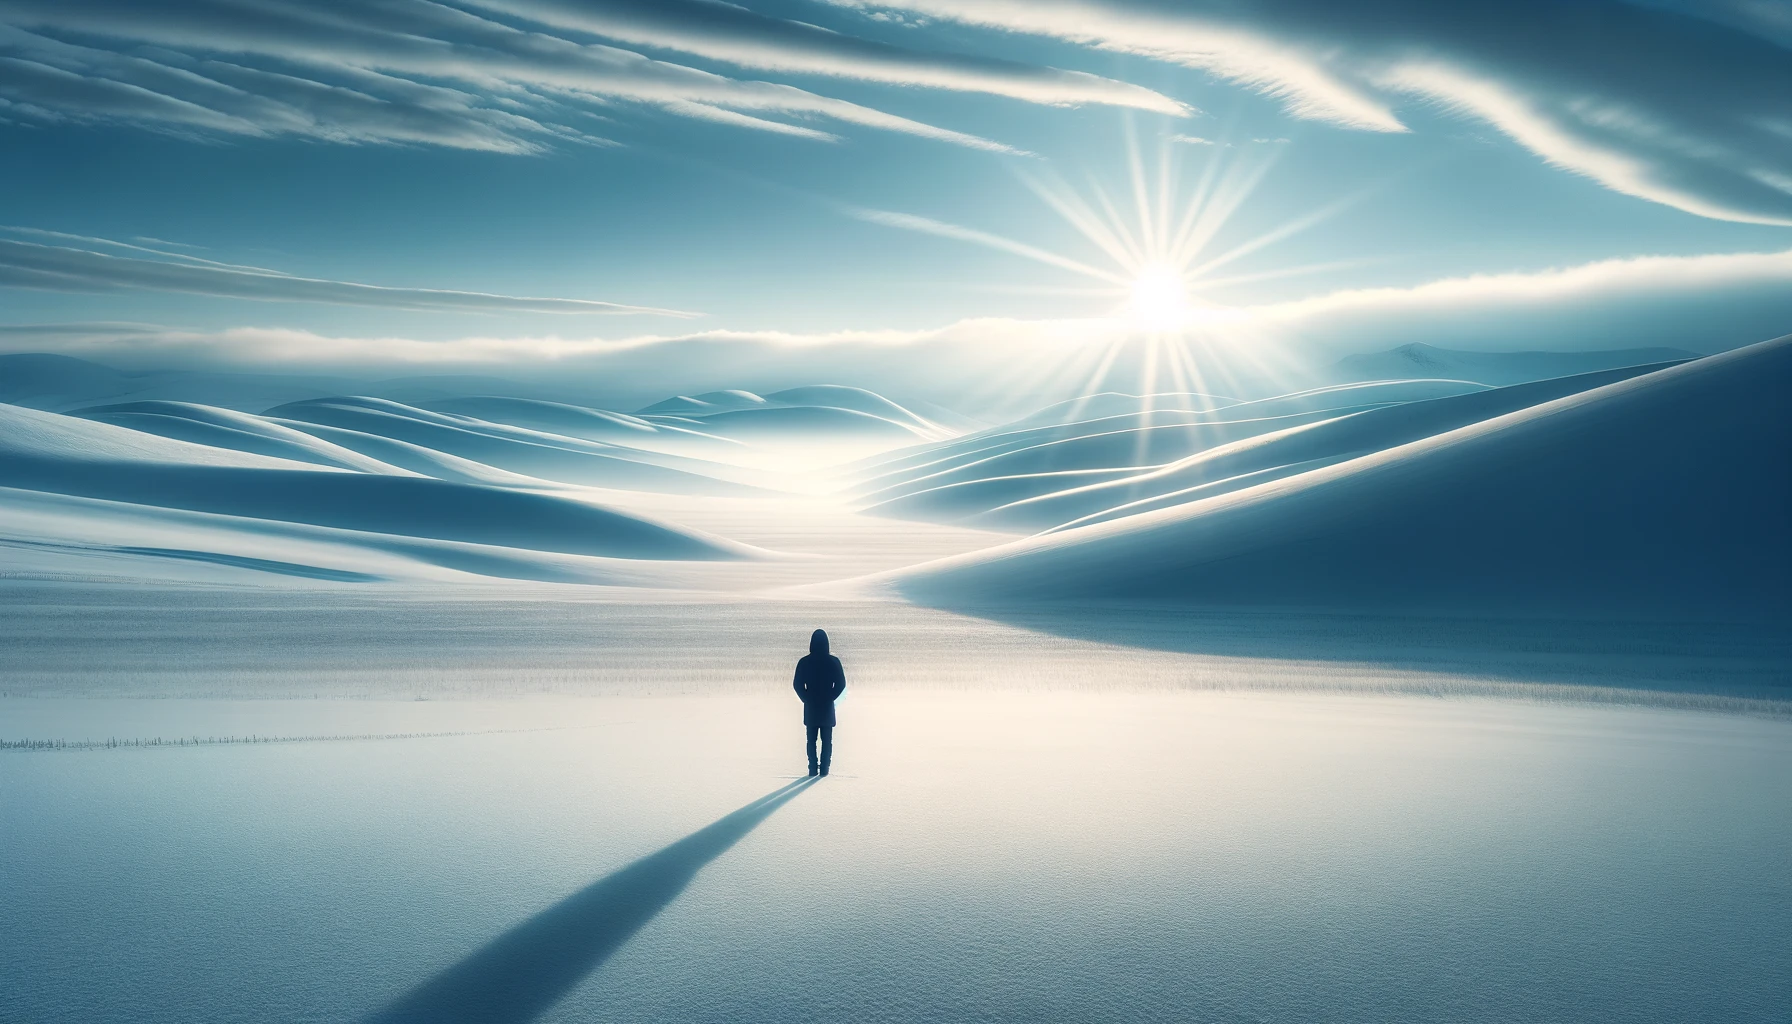 an image depicting a person standing in snow, capturing a serene winter scene.